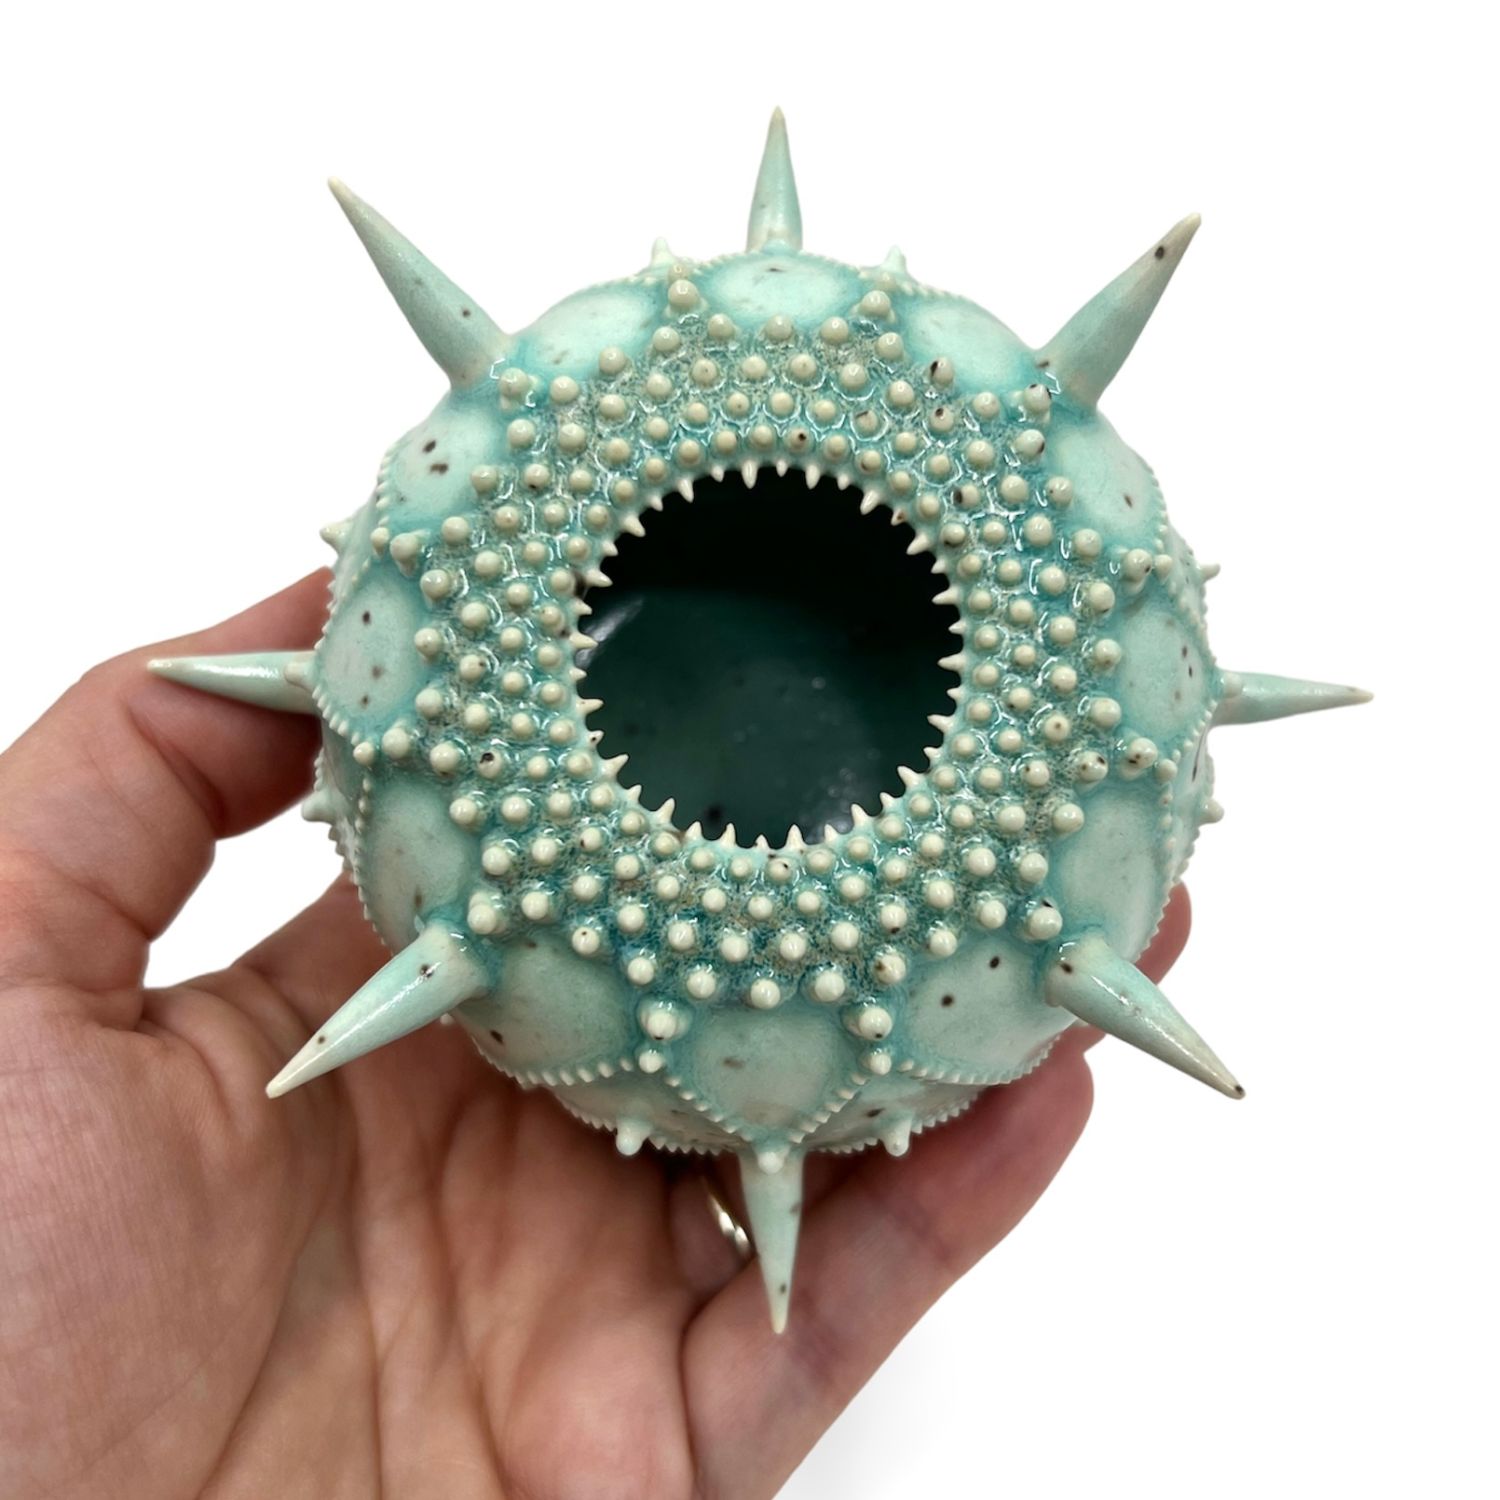 Zara Gardner: Turquoise Sculpture with Spikes Product Image 2 of 6